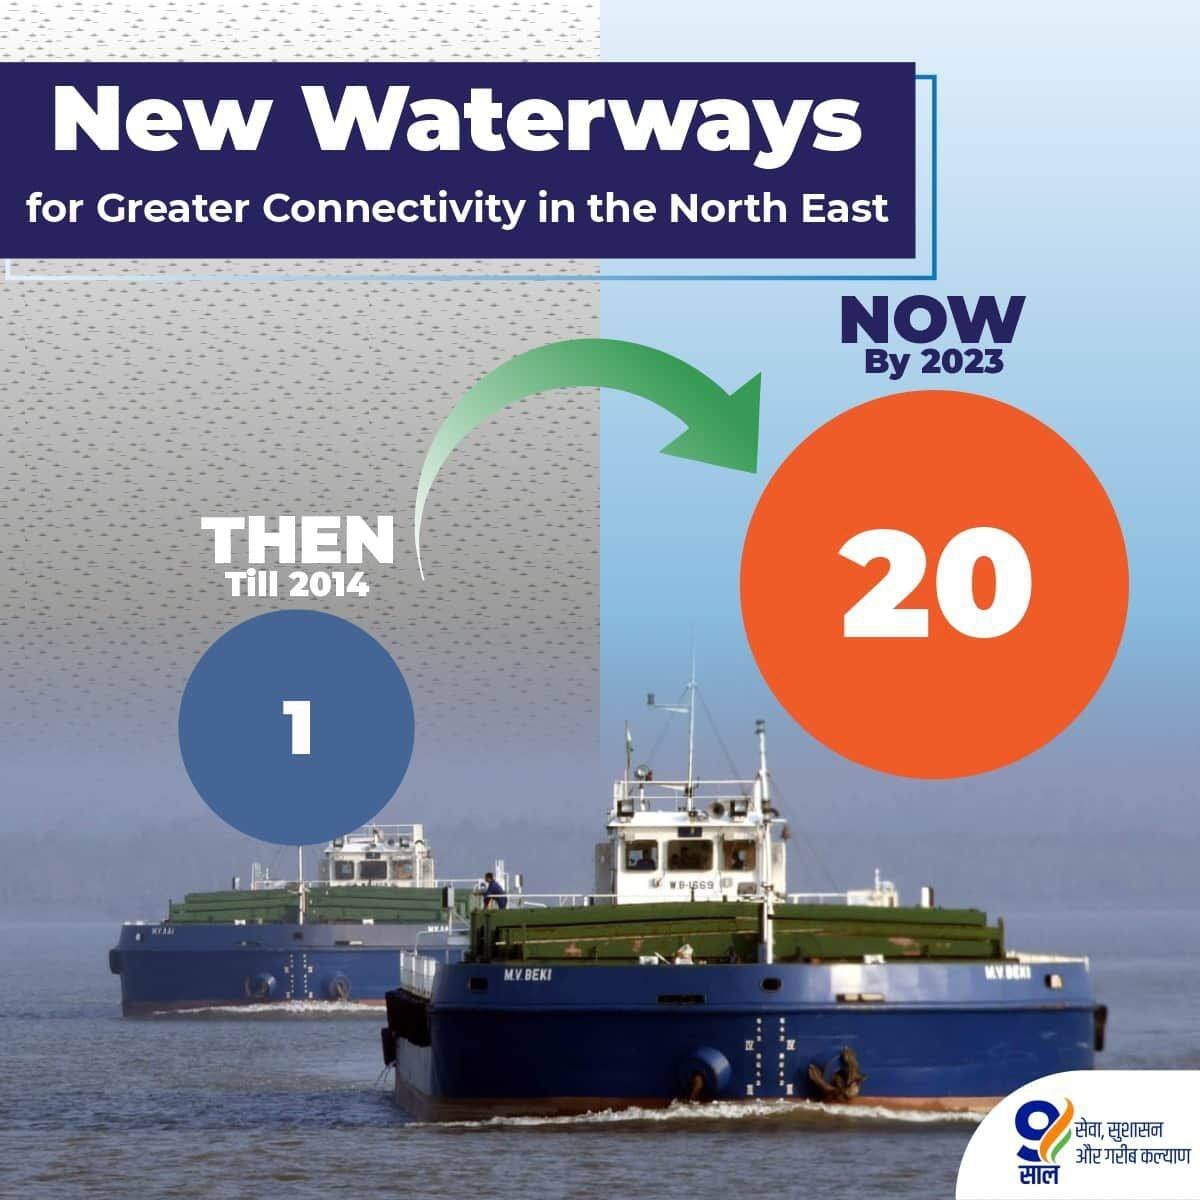 #9YearsOfNorthEastProsperity
New Waterways for Greater Connectivity in the North East